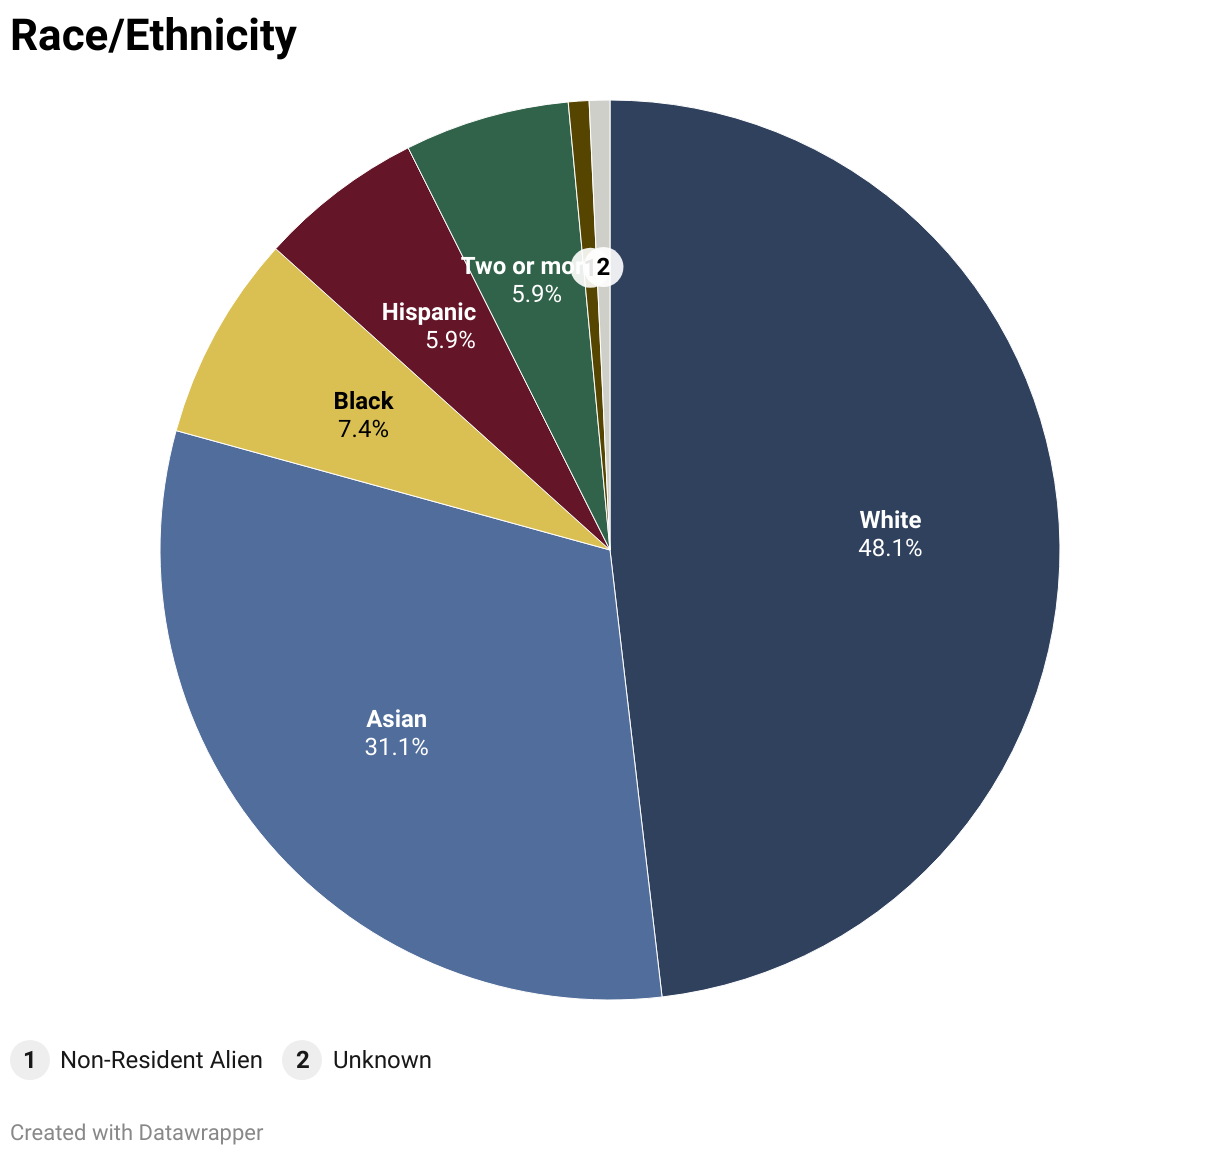 31.11% Asian, 7.40% Black, 5.92% Hispanic, 5.92% Two or more, 0.74% Two or more, 0.74% Unknown, 48.14% White